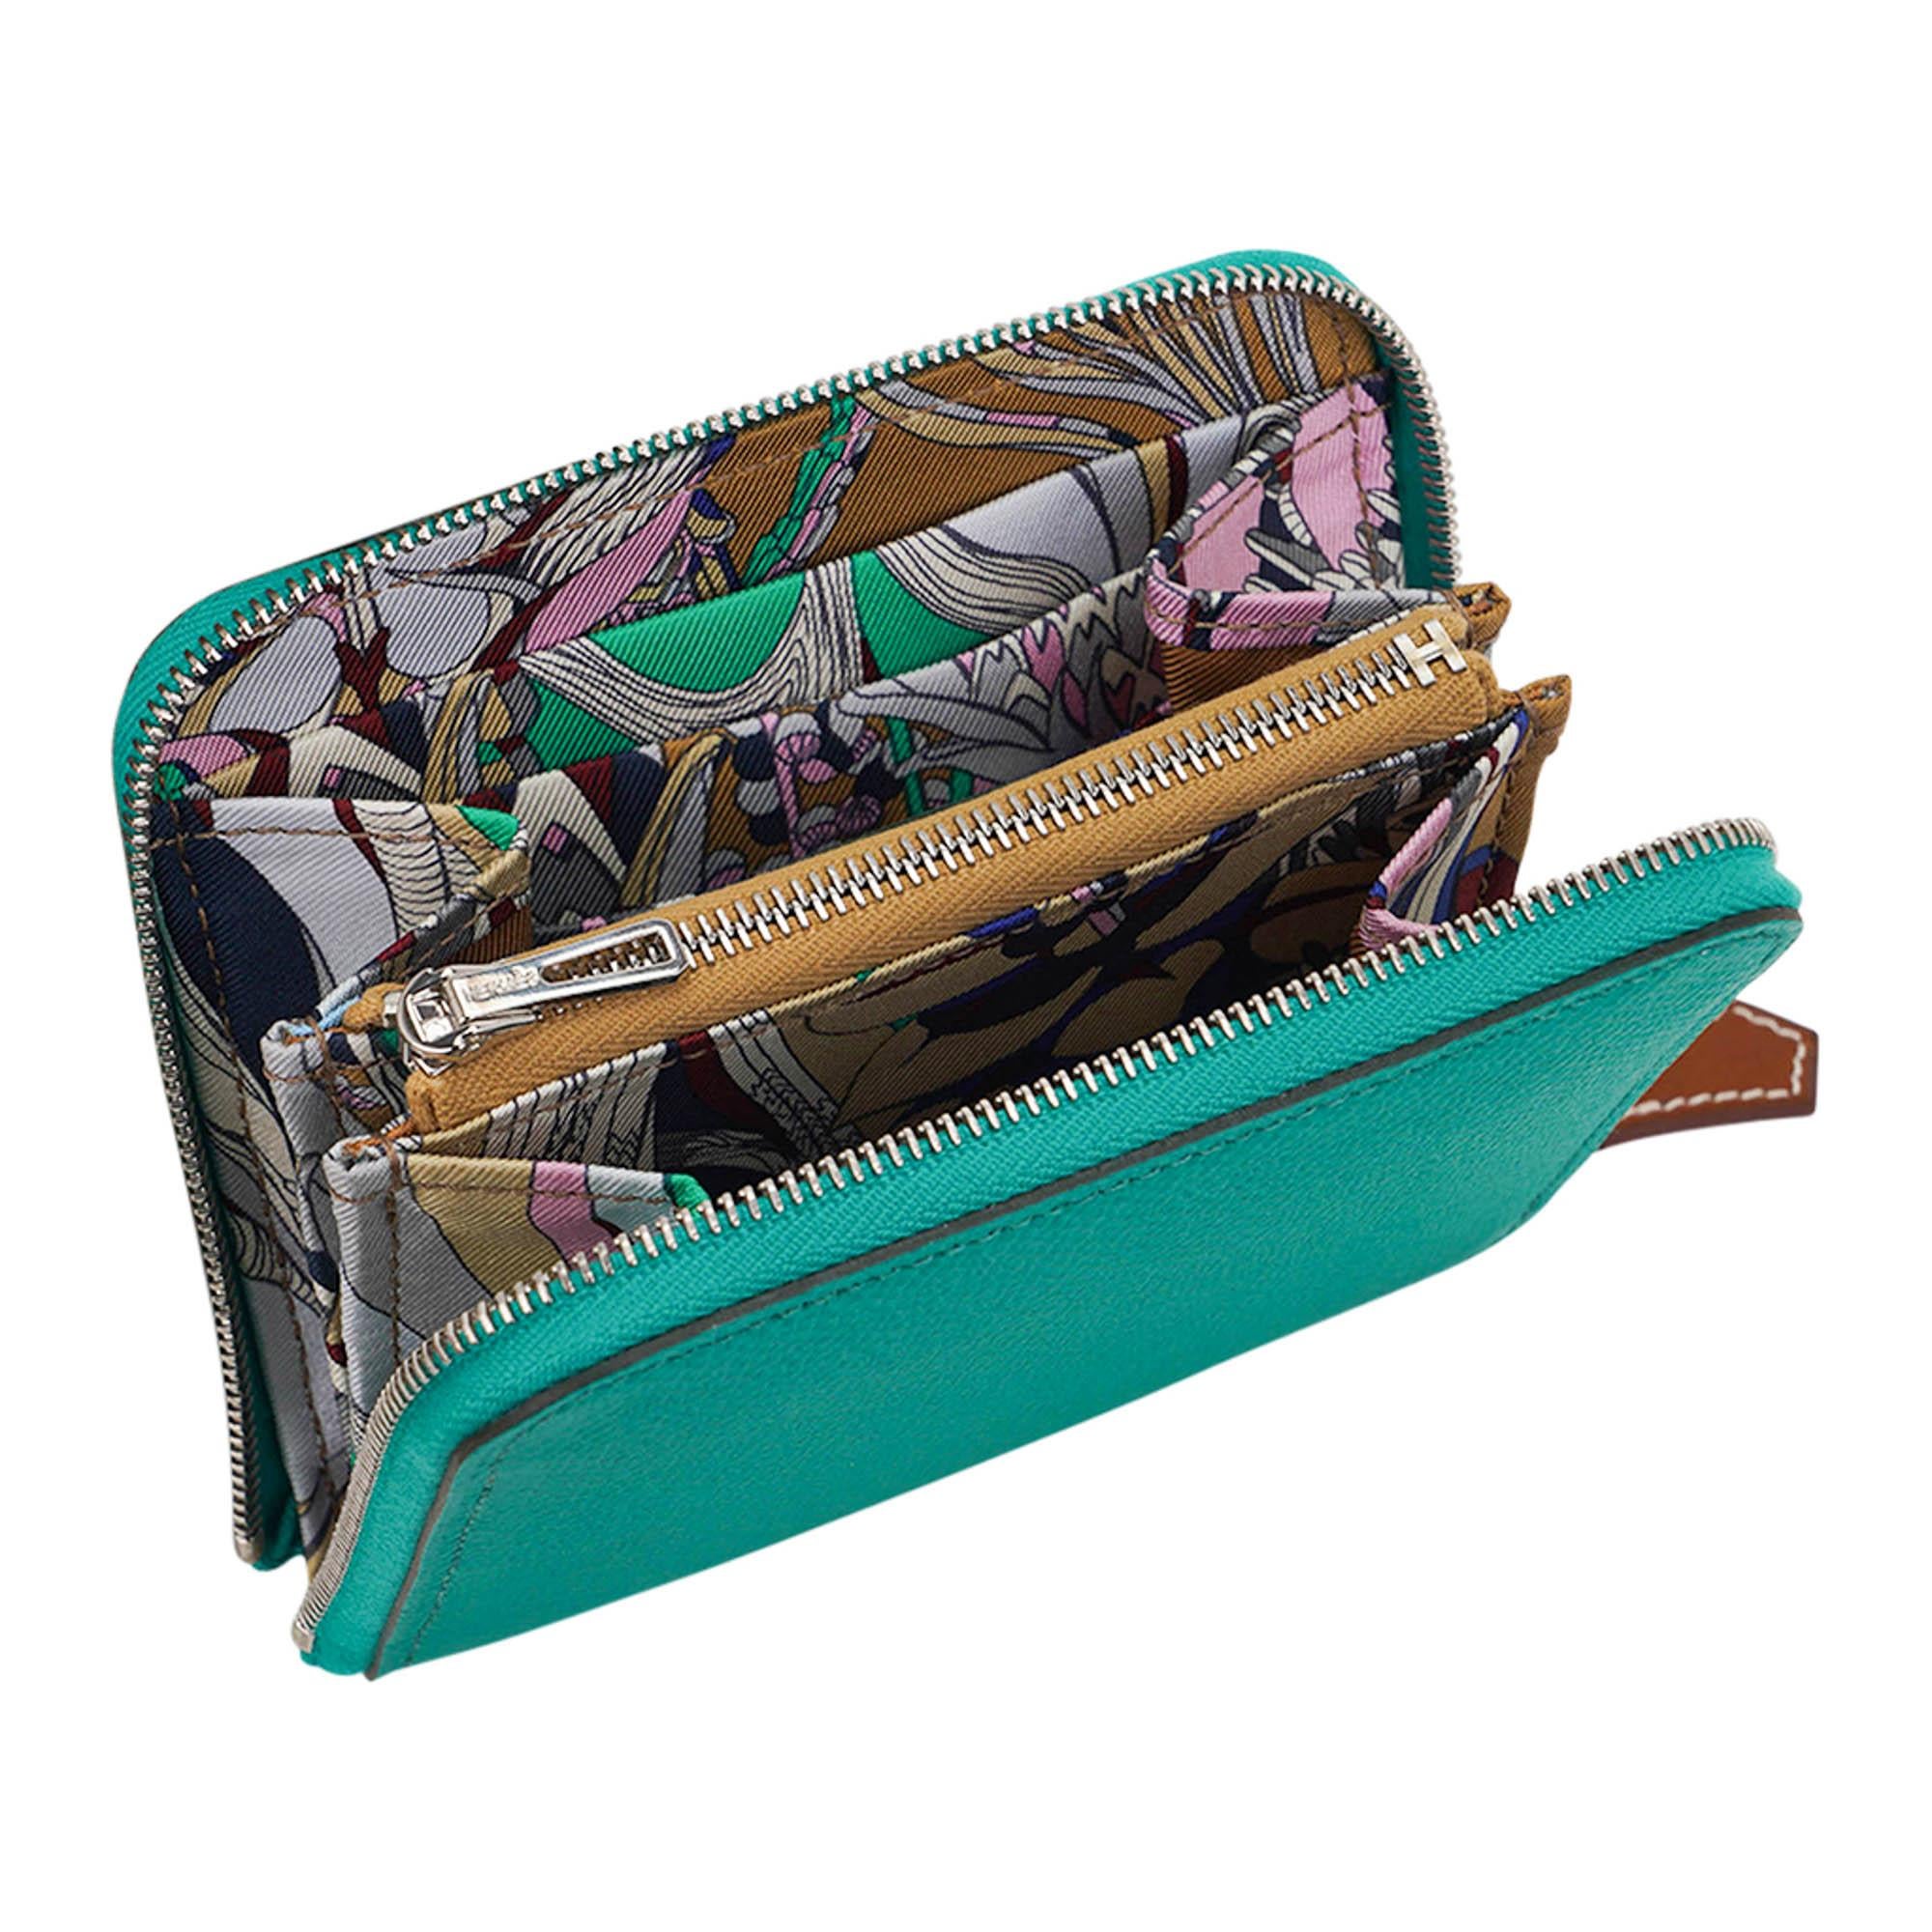 Mightychic offers an Hermes Silk'In Compact Wallet featured in jewel toned Jade.
Interior is lined in silk twill Botanical Fantasy print by Virginie Jamin.
This beautiful coin wallet has 3 credit card slots on each side with center zip